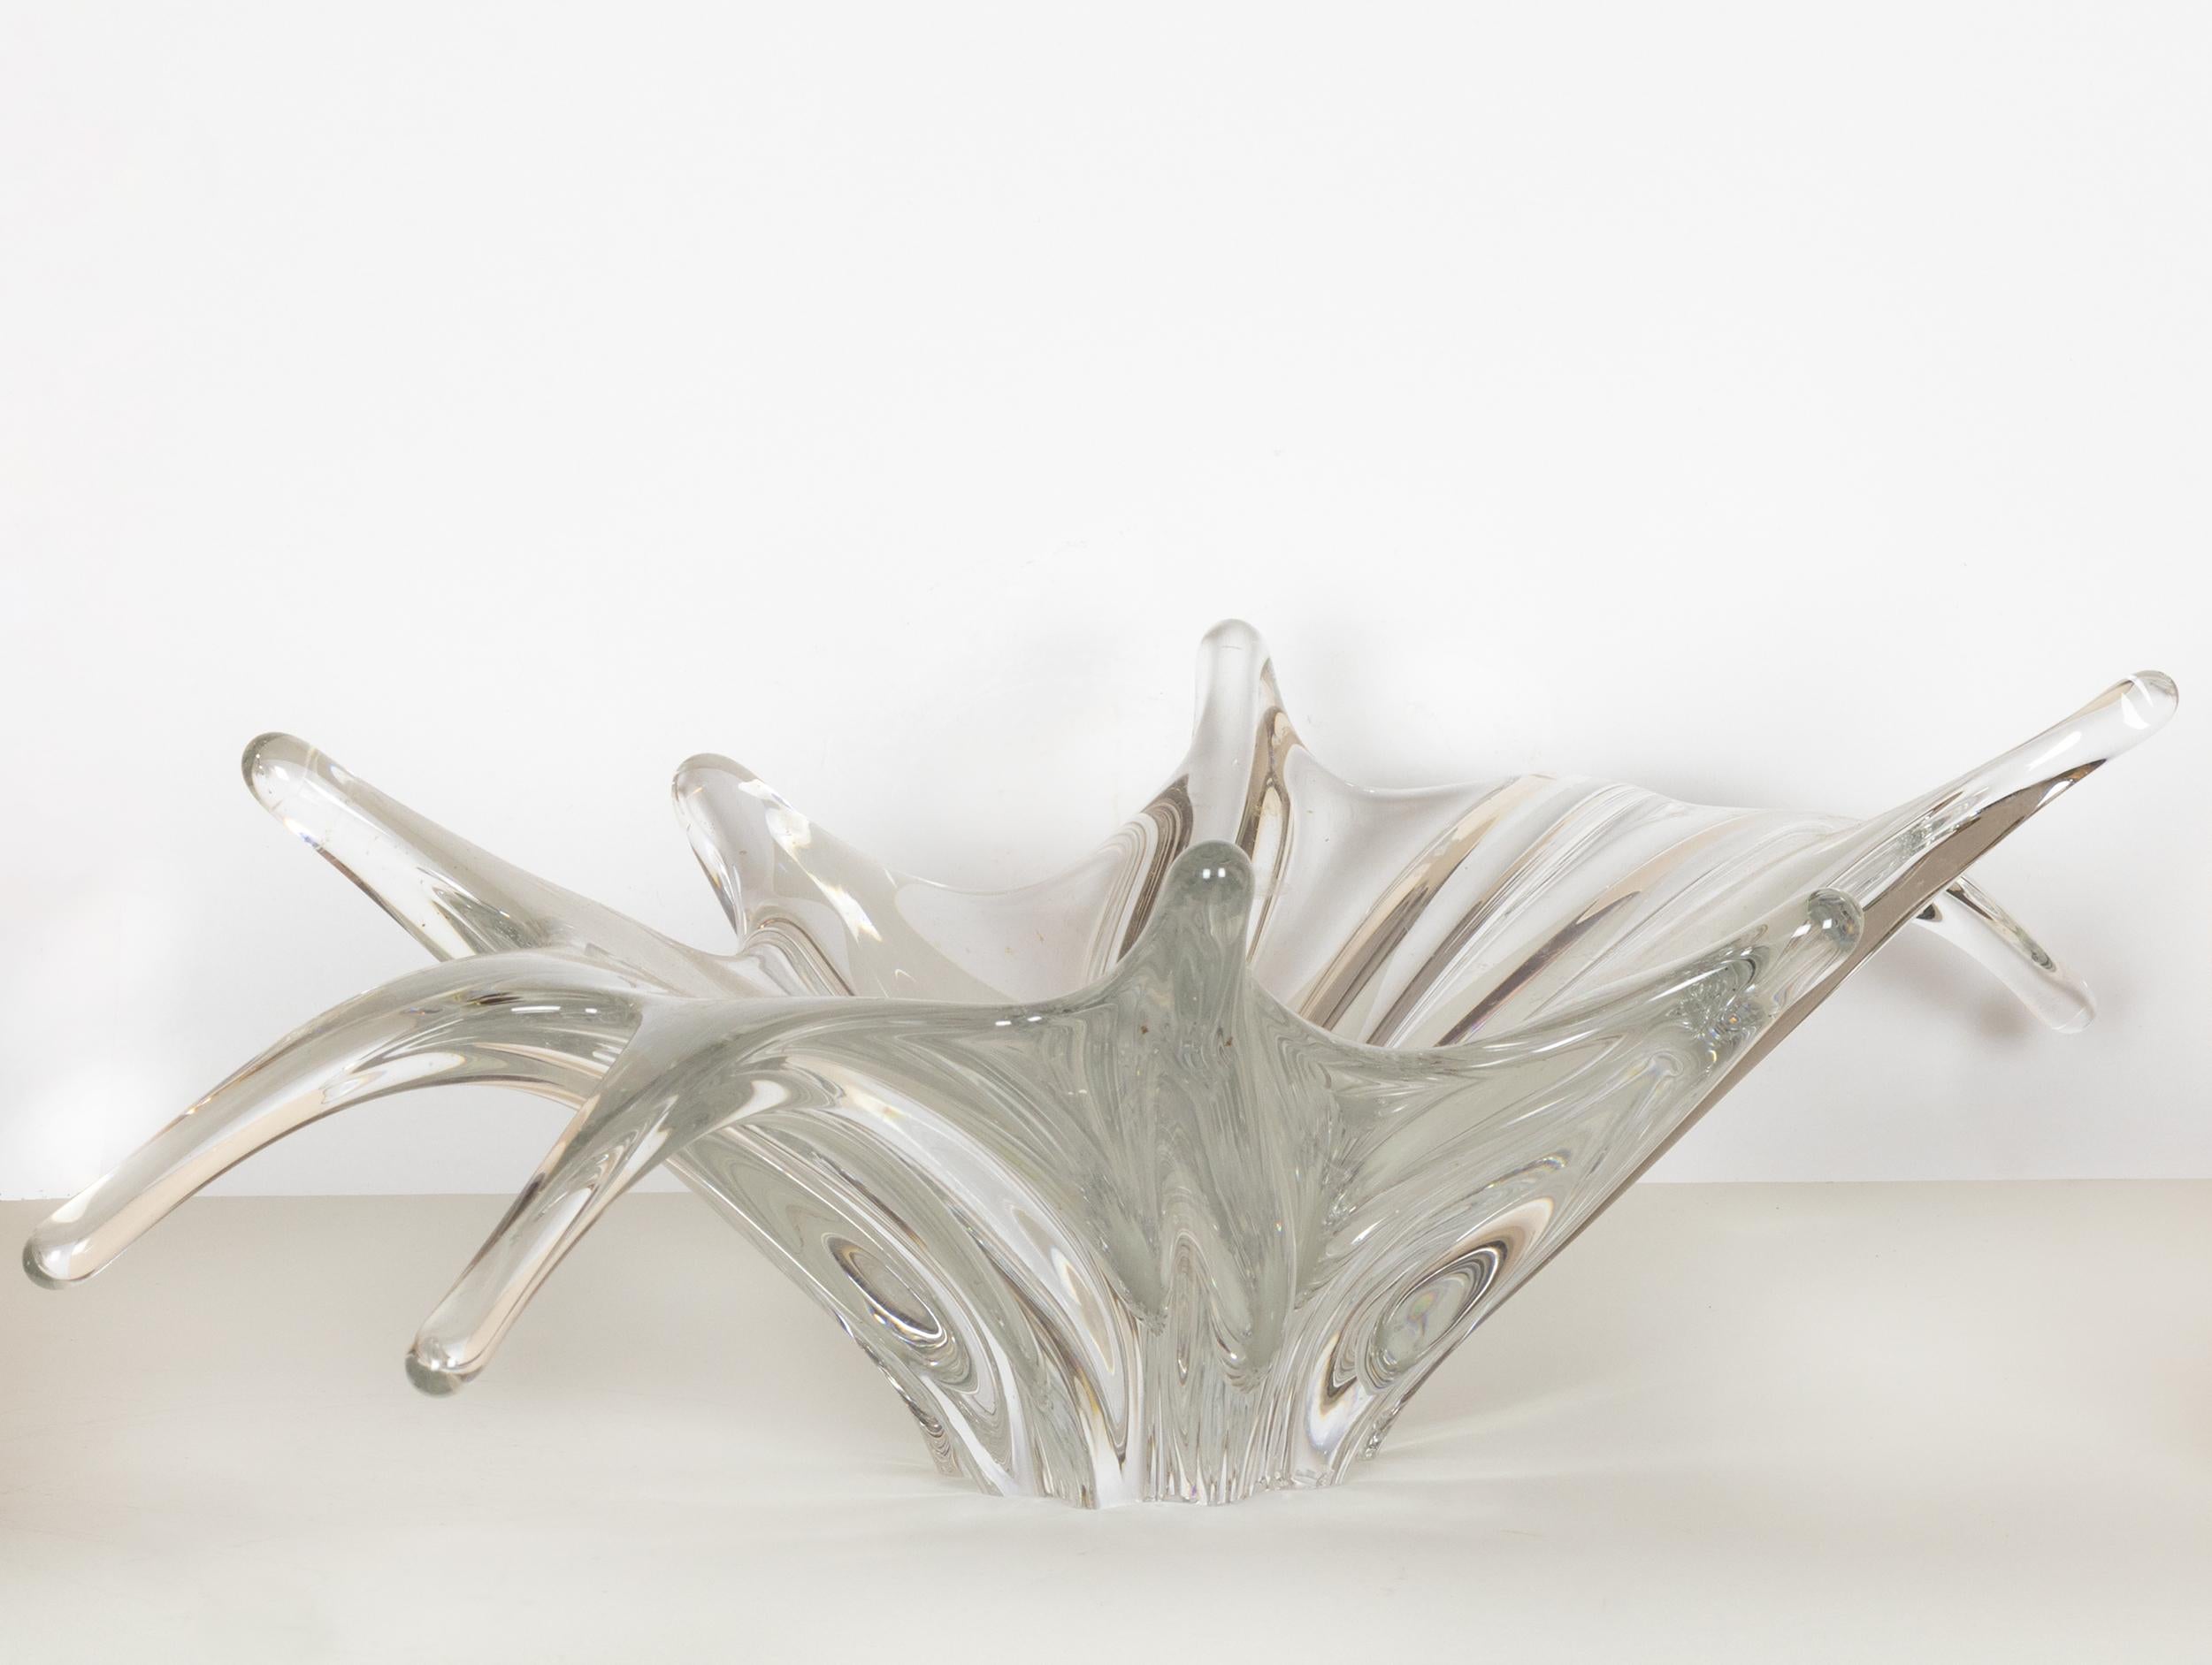 Large Floral Crystal Centerpiece Bowl by Baccarat In Good Condition For Sale In Lisbon, PT